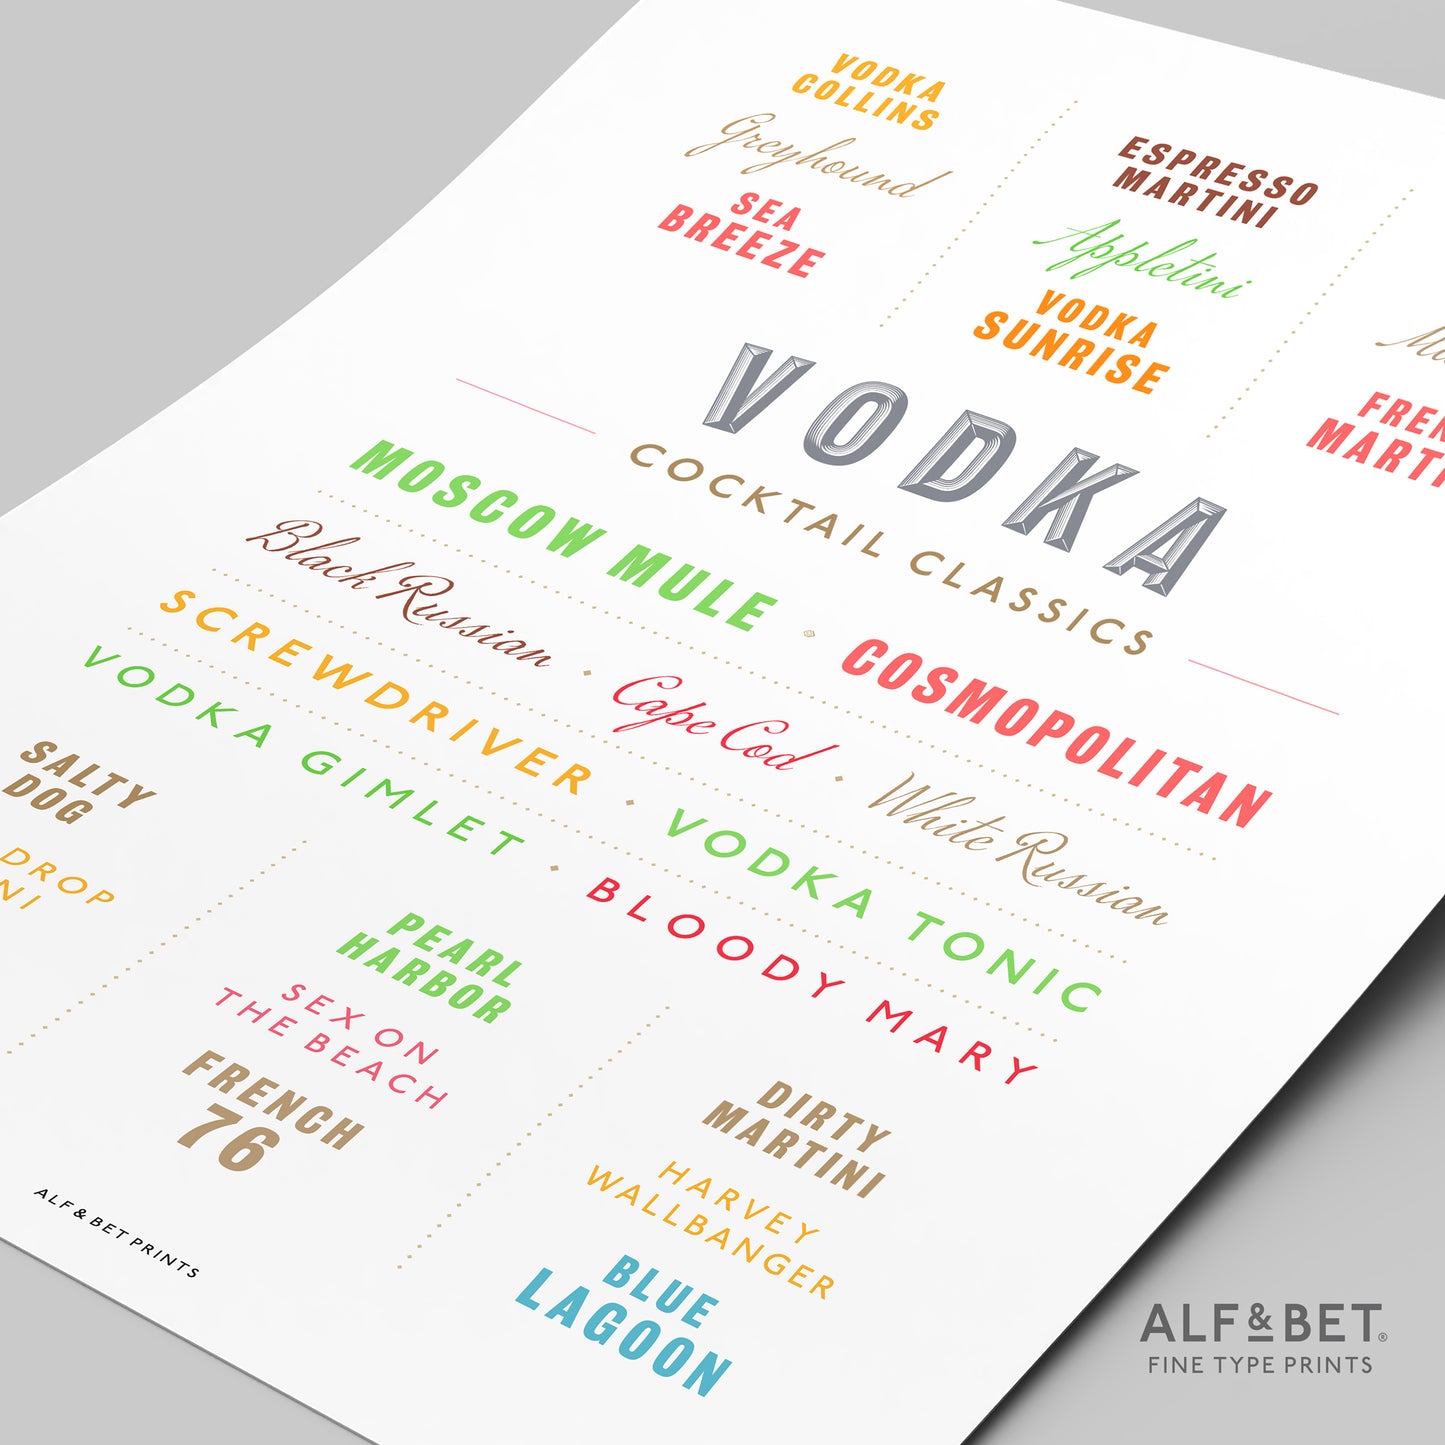 Cocktail Classics - Vodka Print from Alf and Bet.